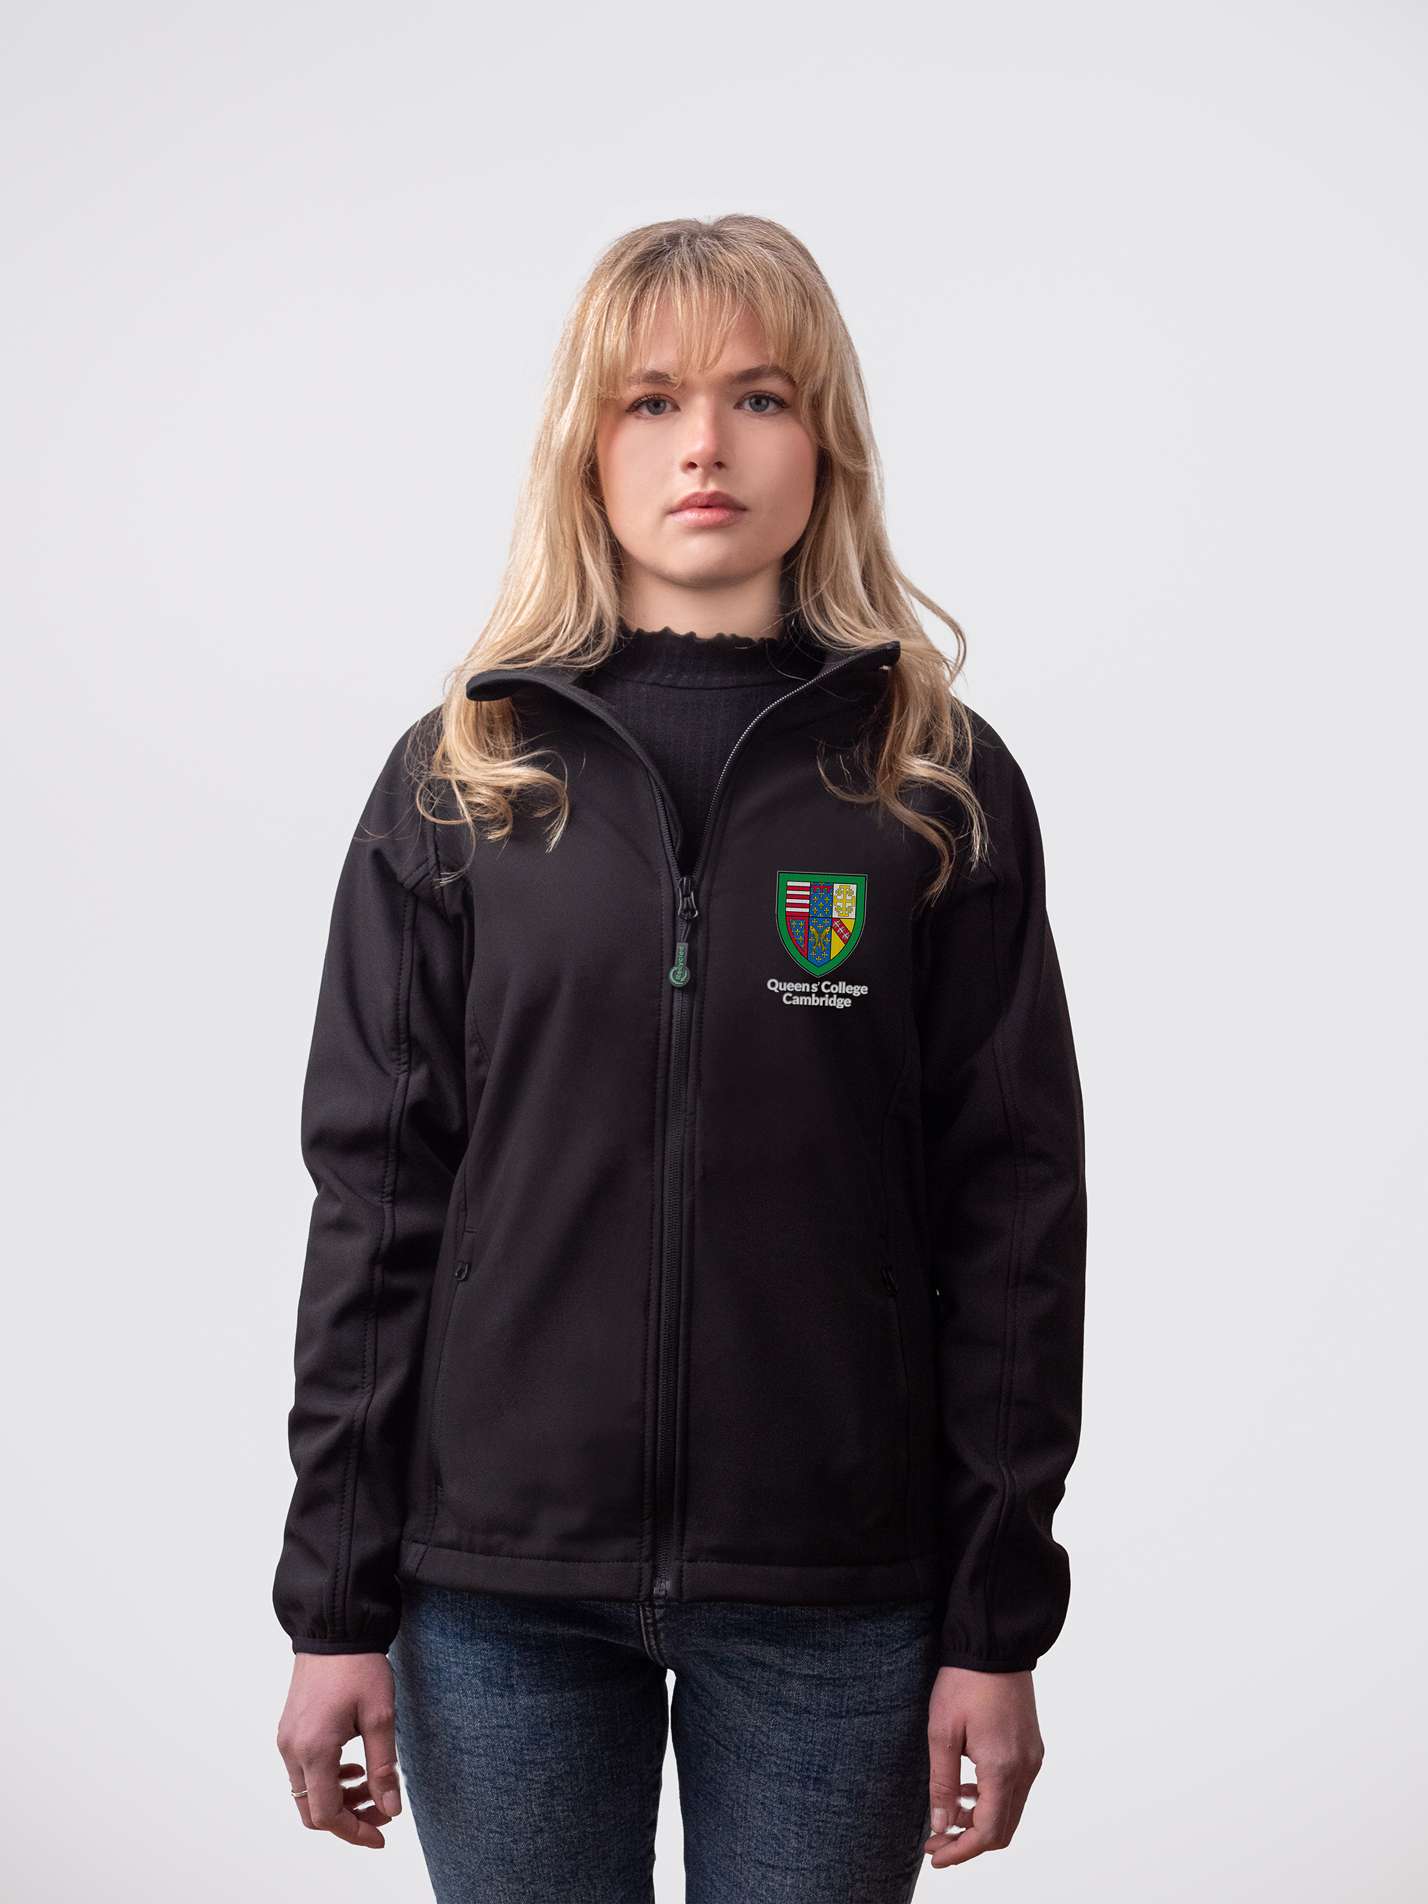 A student wearing a sustainable, Queens' College embroidered jacket